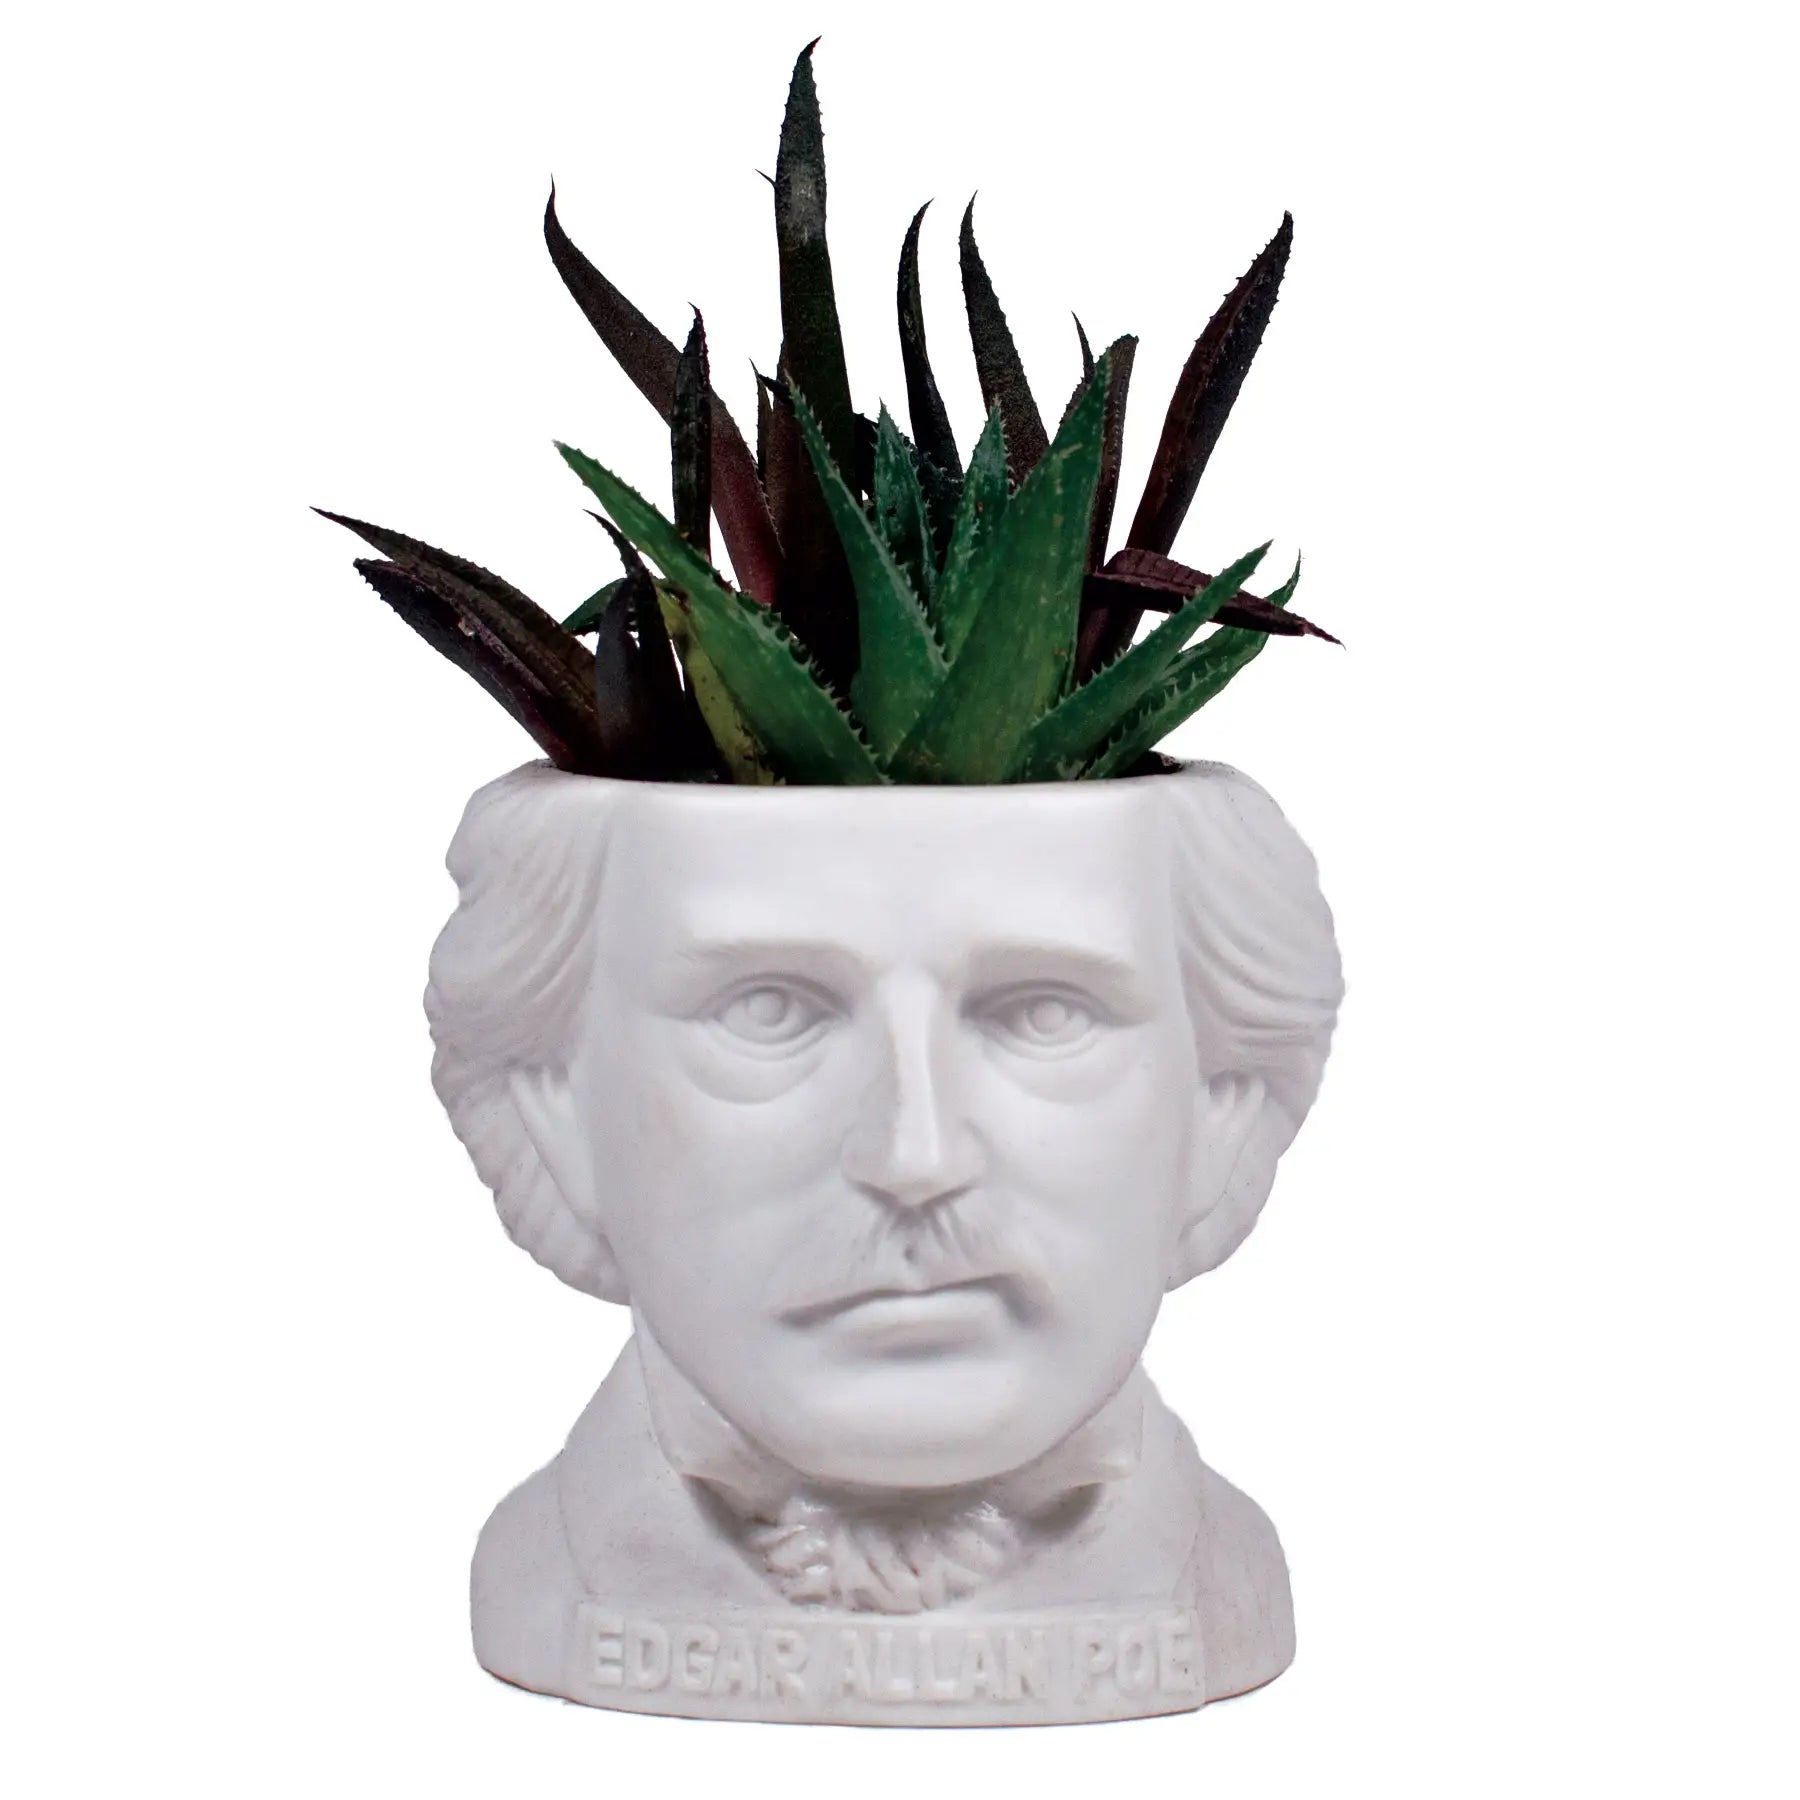 A matte off white bisque miniature planter in the shape of a bust of Edgar Allen Poe with a small aloe plant growing out of it